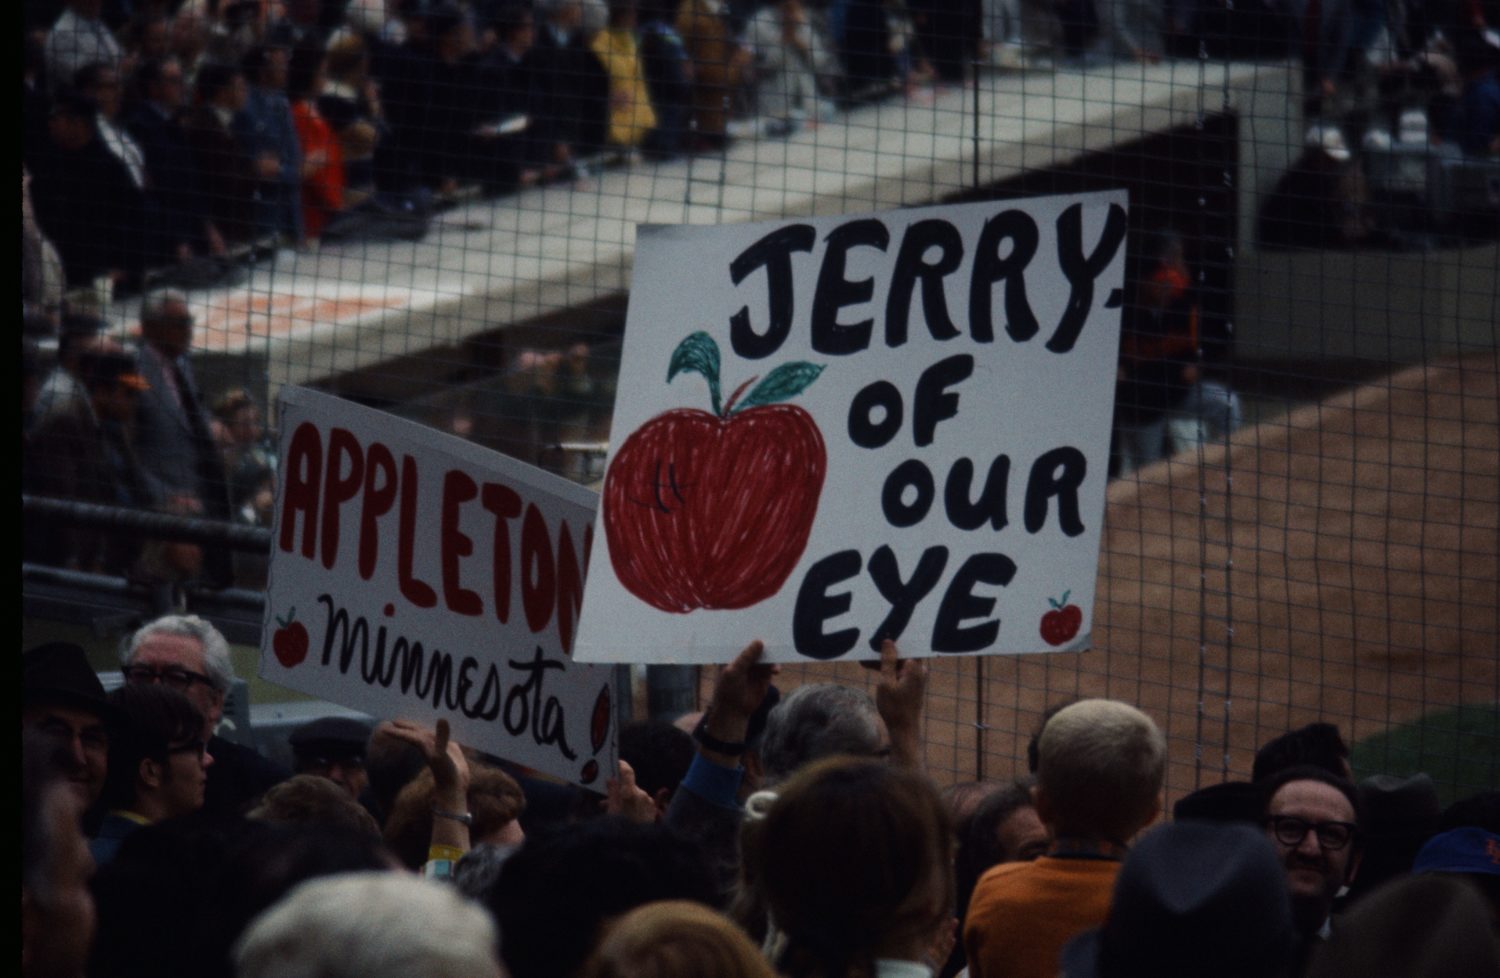 Fans Show Support for Koosman in '69 World Series